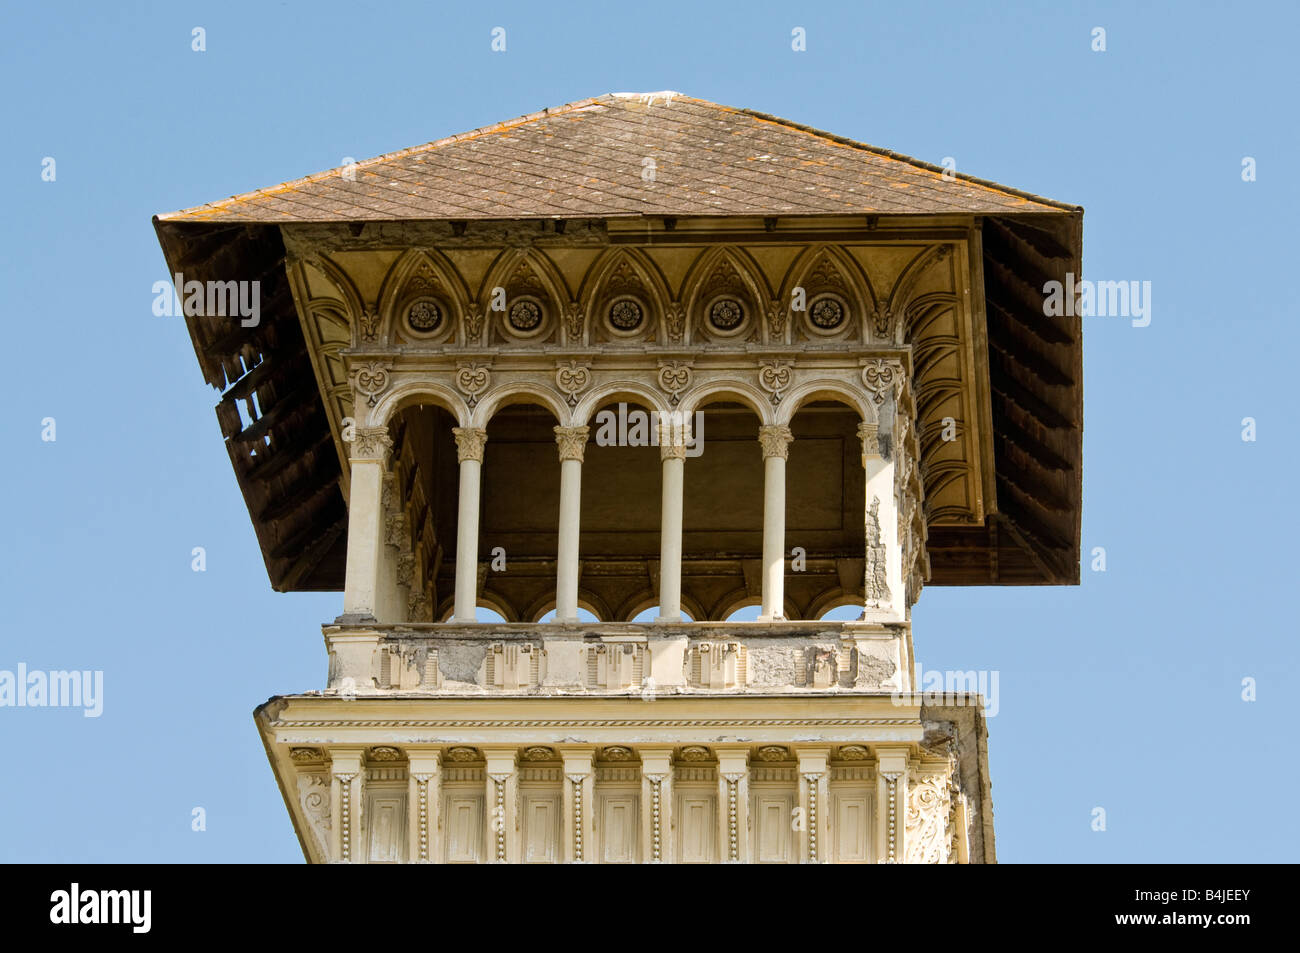 Ornate arches and columns on a tower in Ercolano, Italy Stock Photo